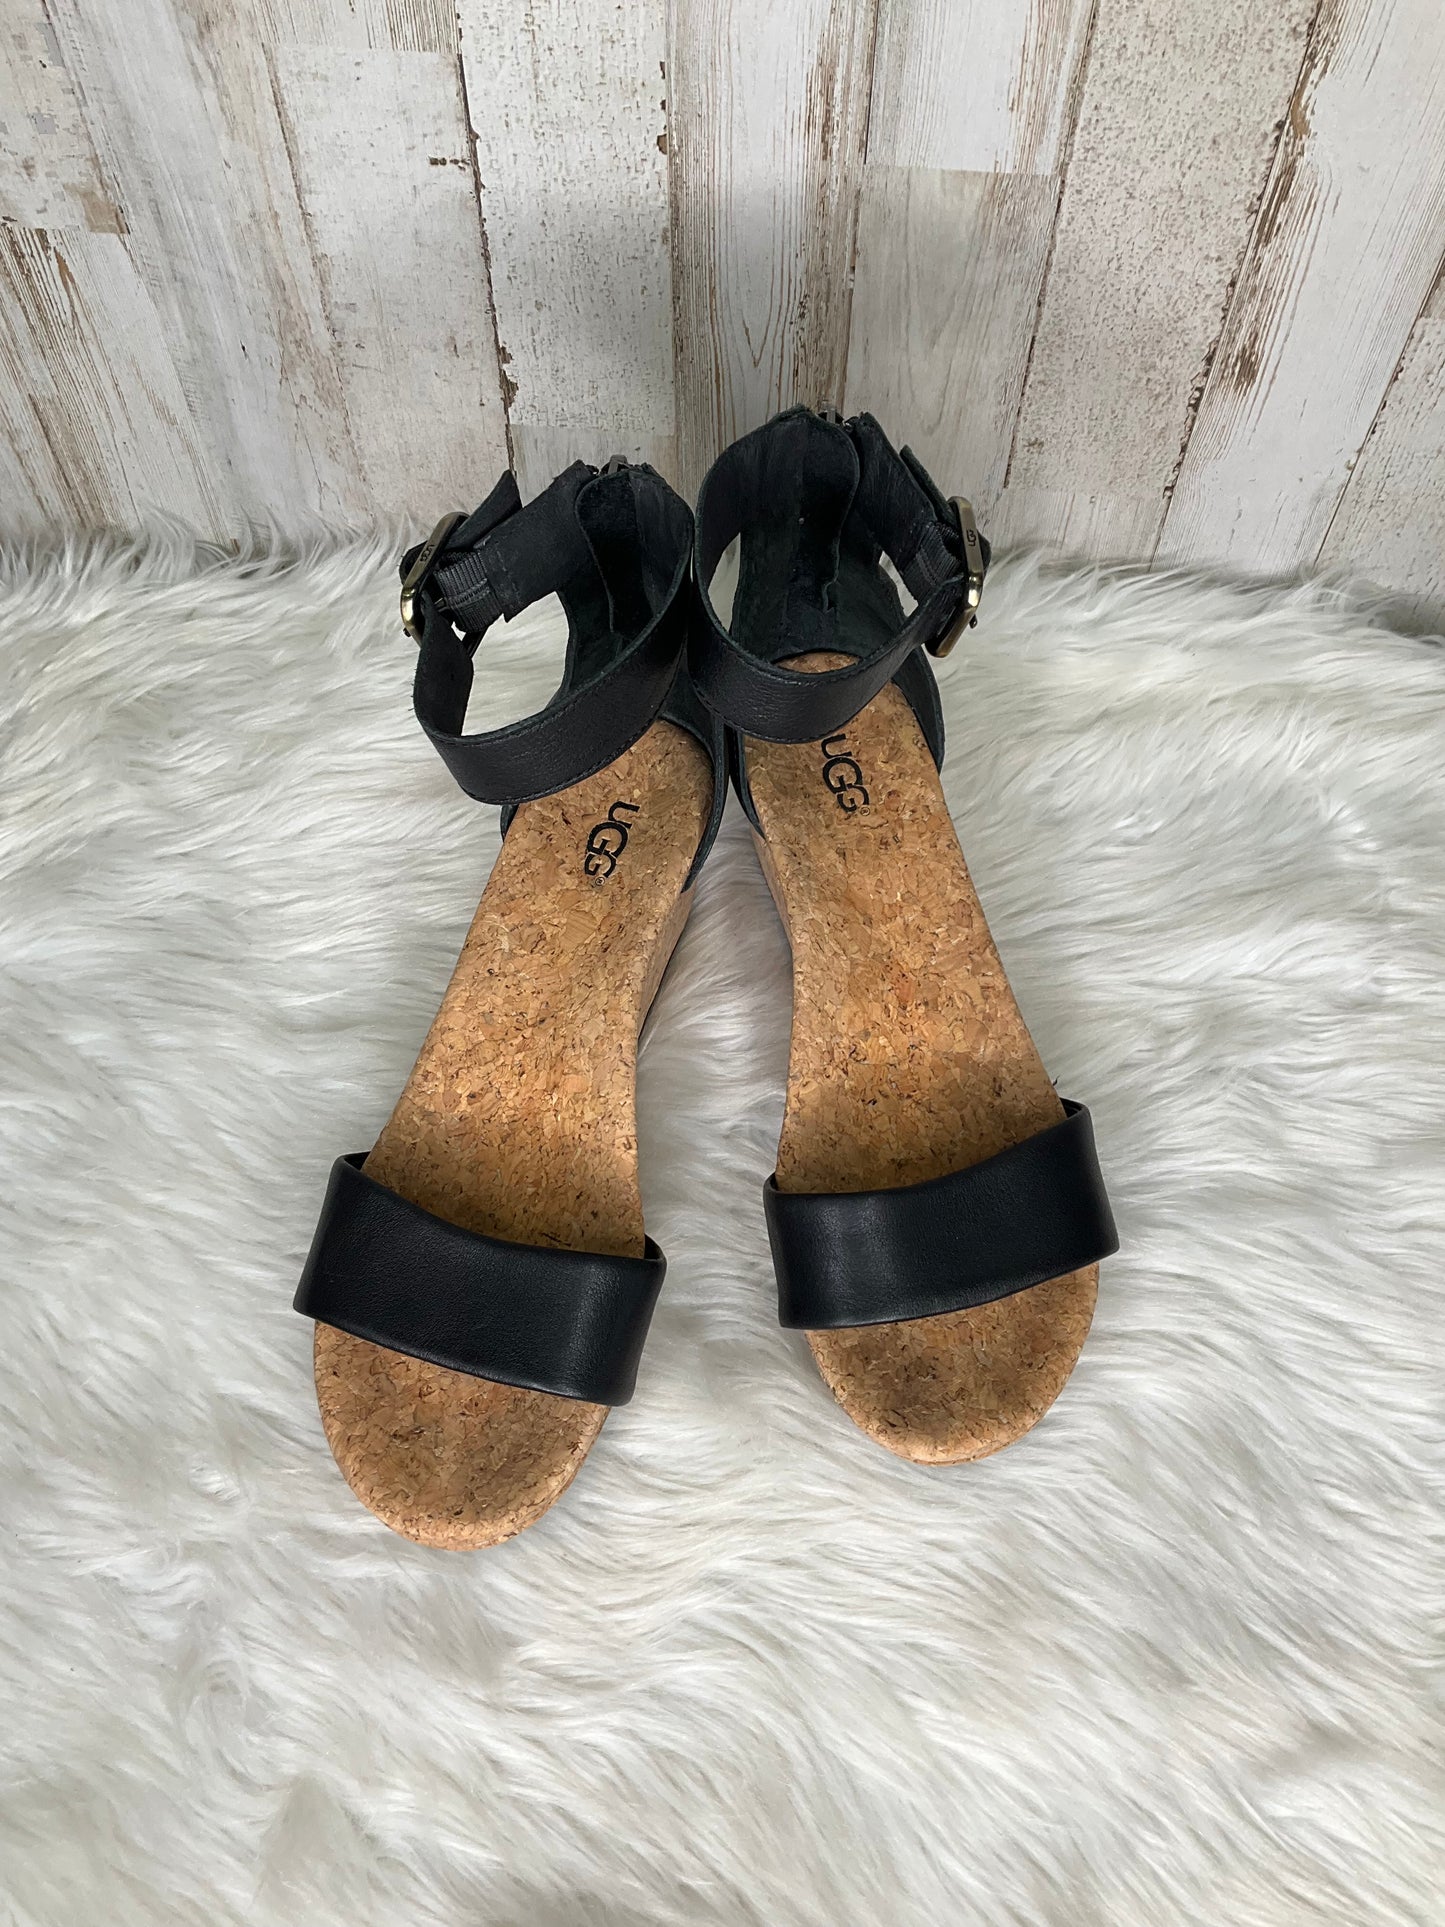 Sandals Heels Wedge By Ugg  Size: 7